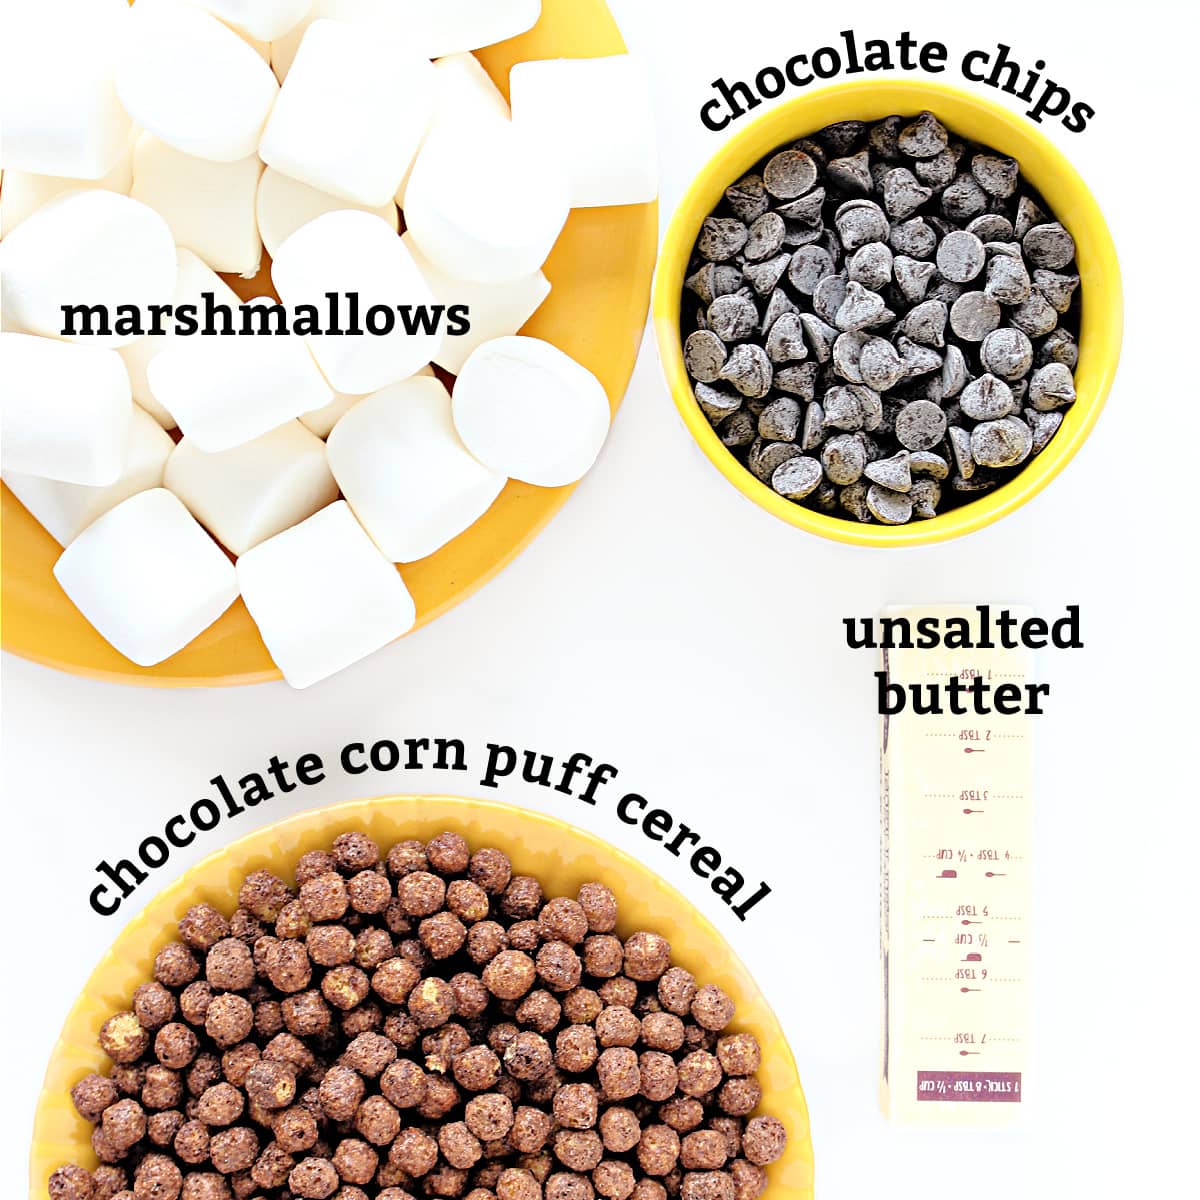 Ingredients labeled: marshmallows, chocolate chips, chocolate corn puff cereal, unsalted butter.